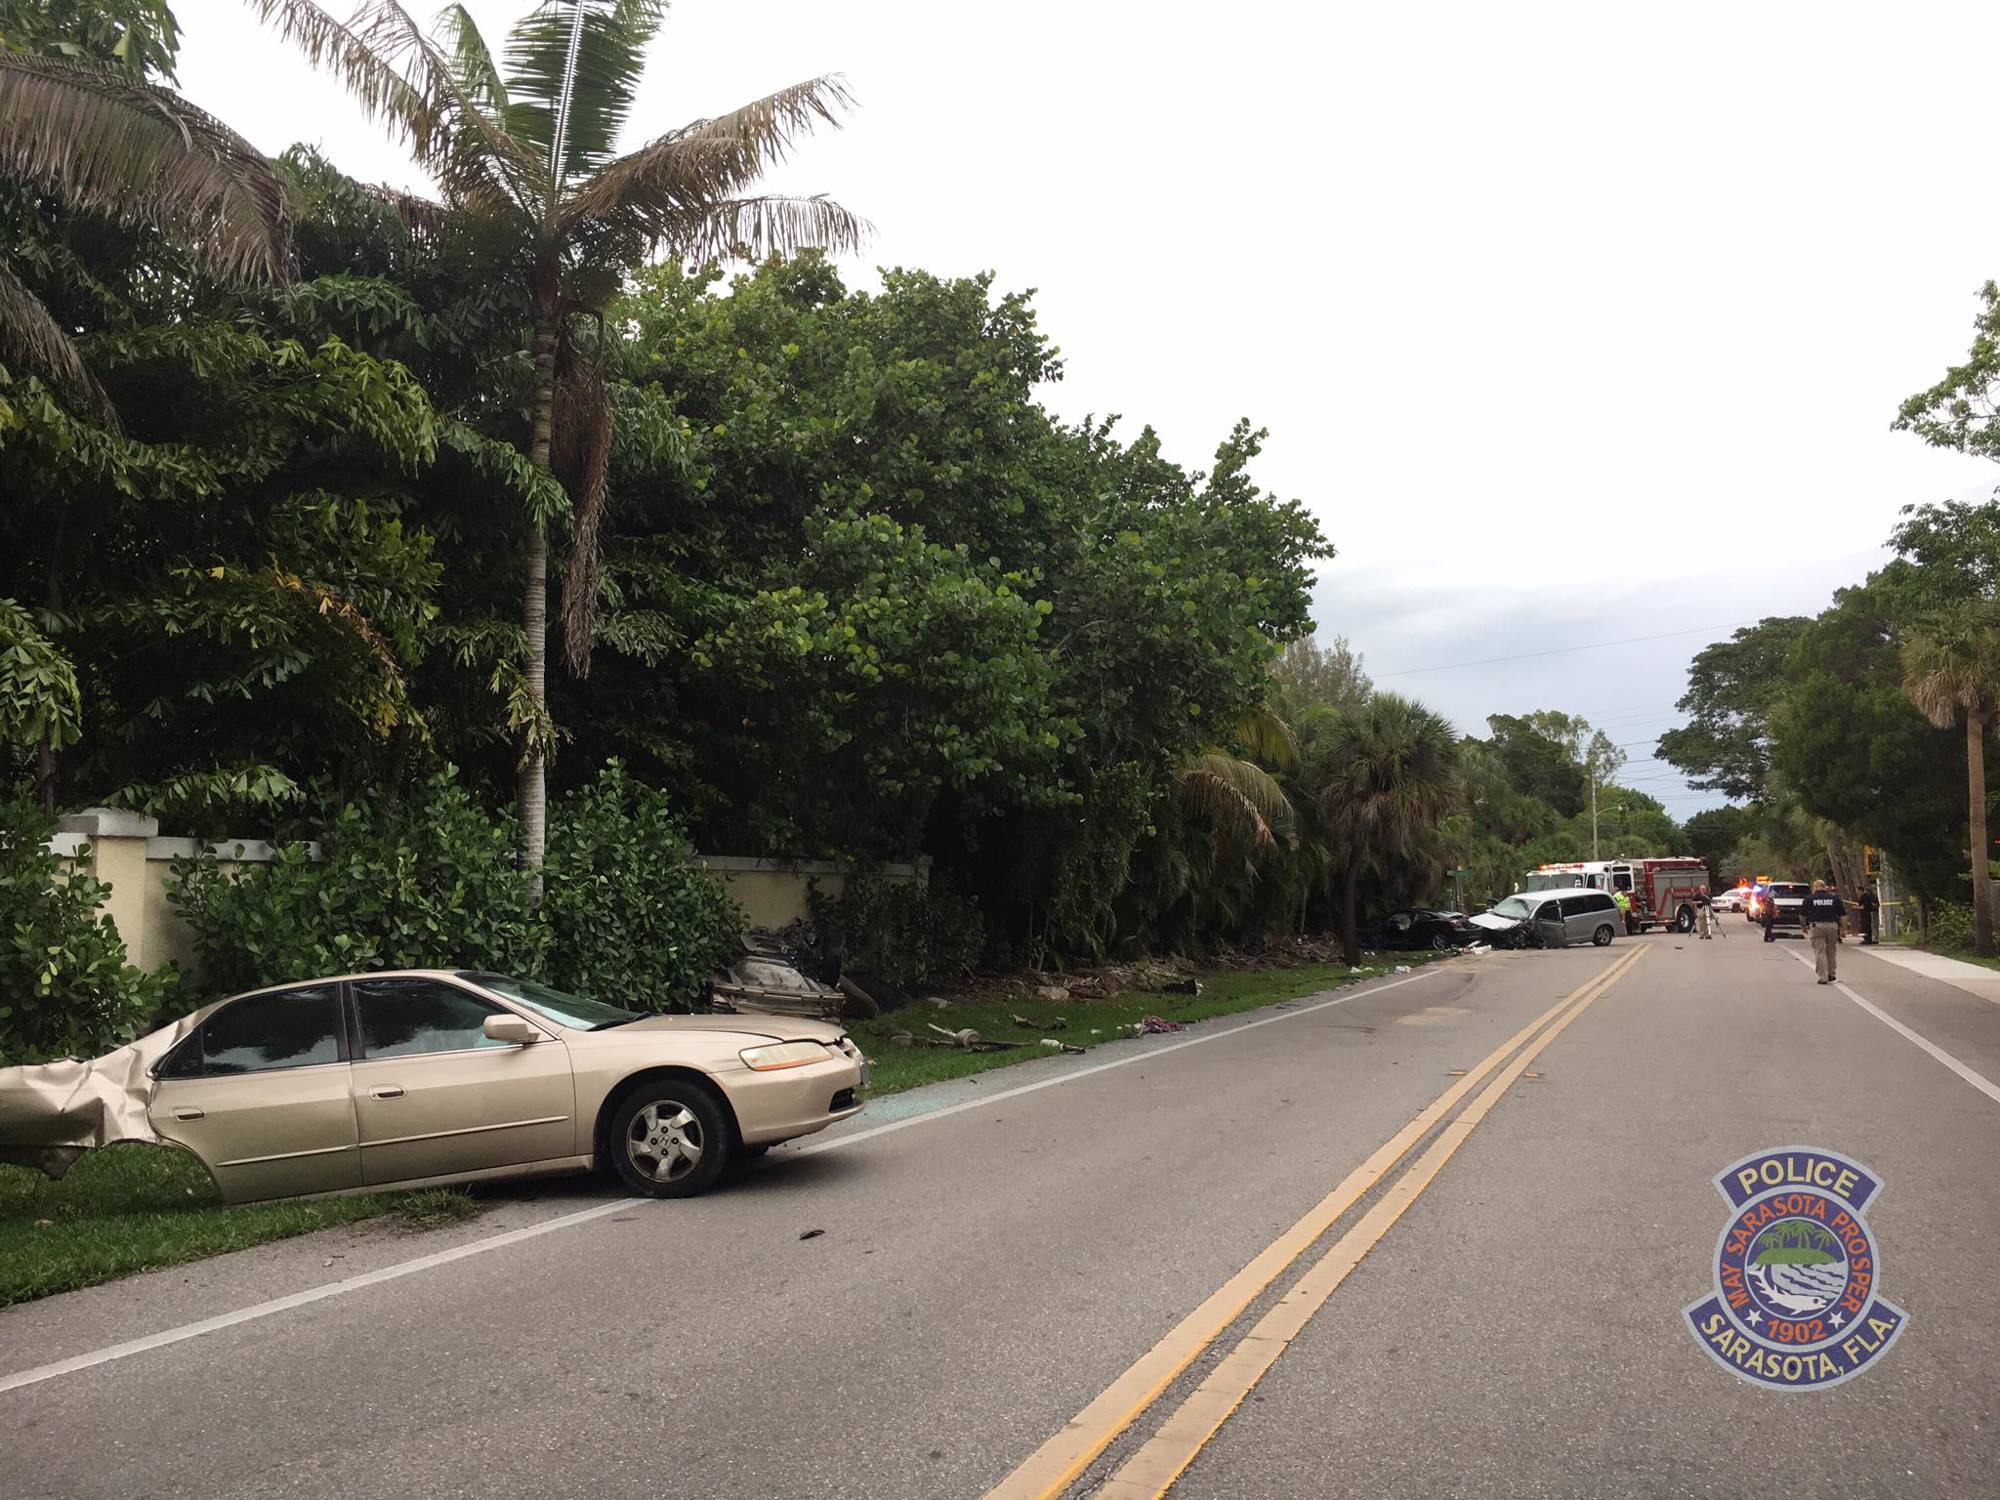 The Sarasota Police Department shared this image of the aftermath along Higel Avenue following a three-car crash.